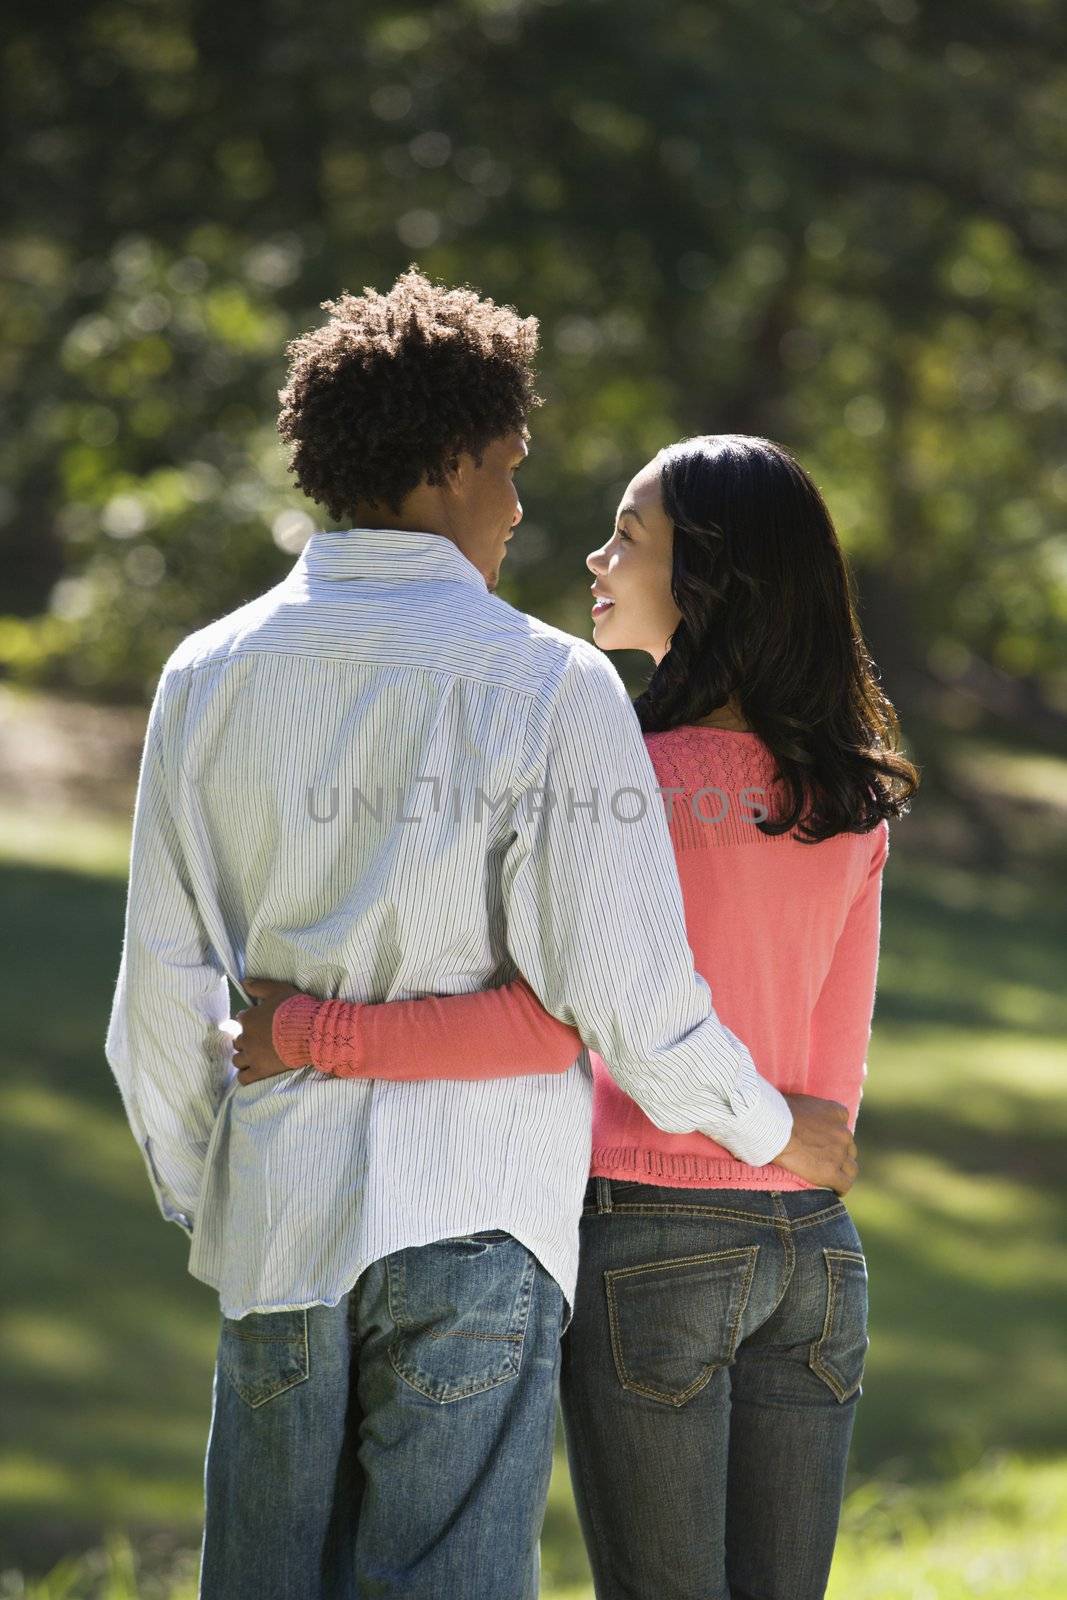 Rear view of couple with arms around eachother looking into eachother's eyes in park.